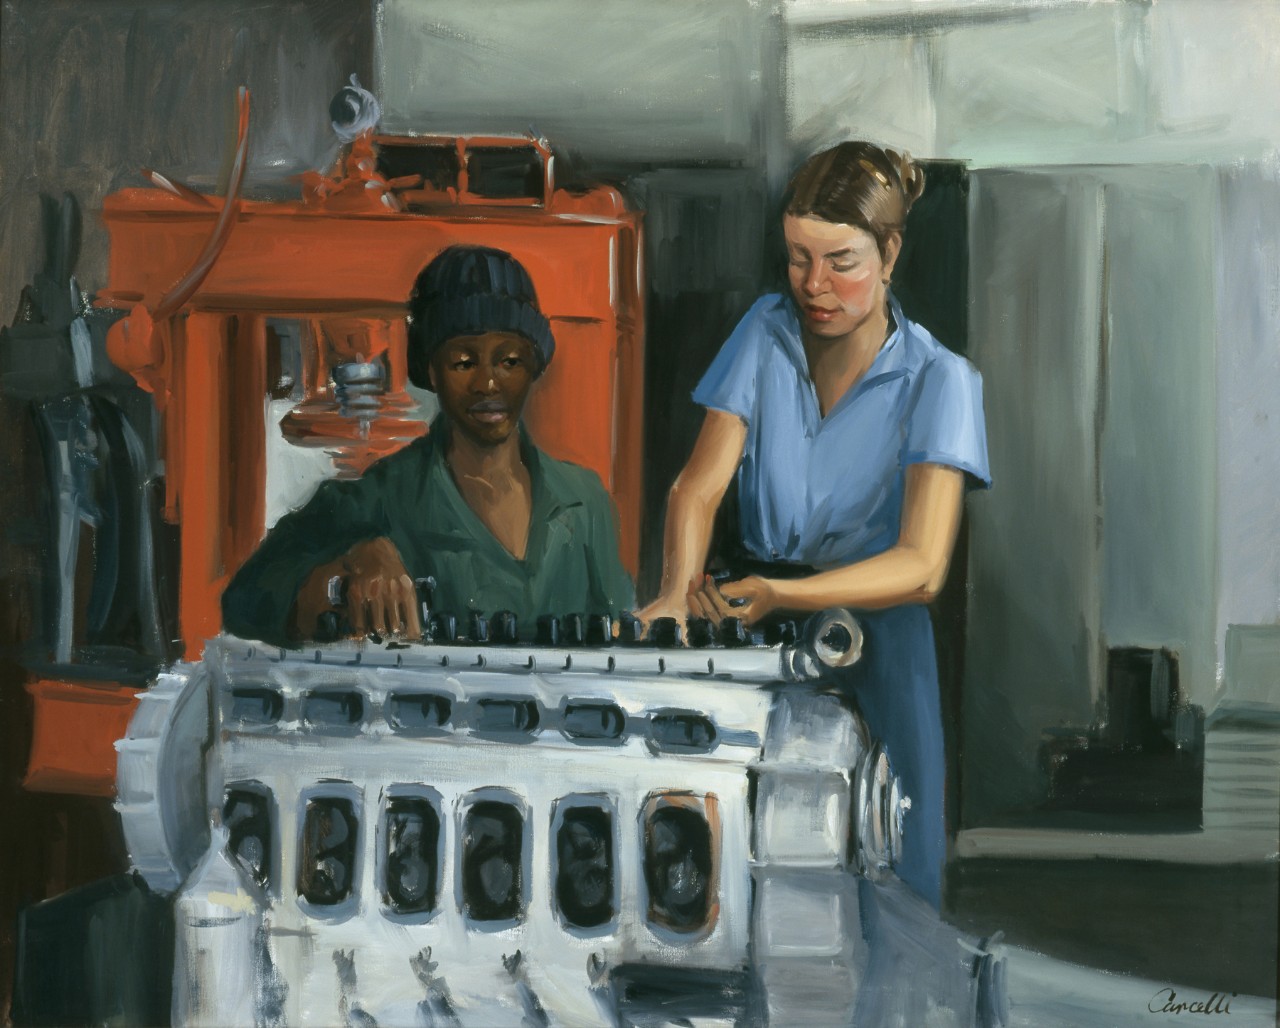 Two women working on an engine